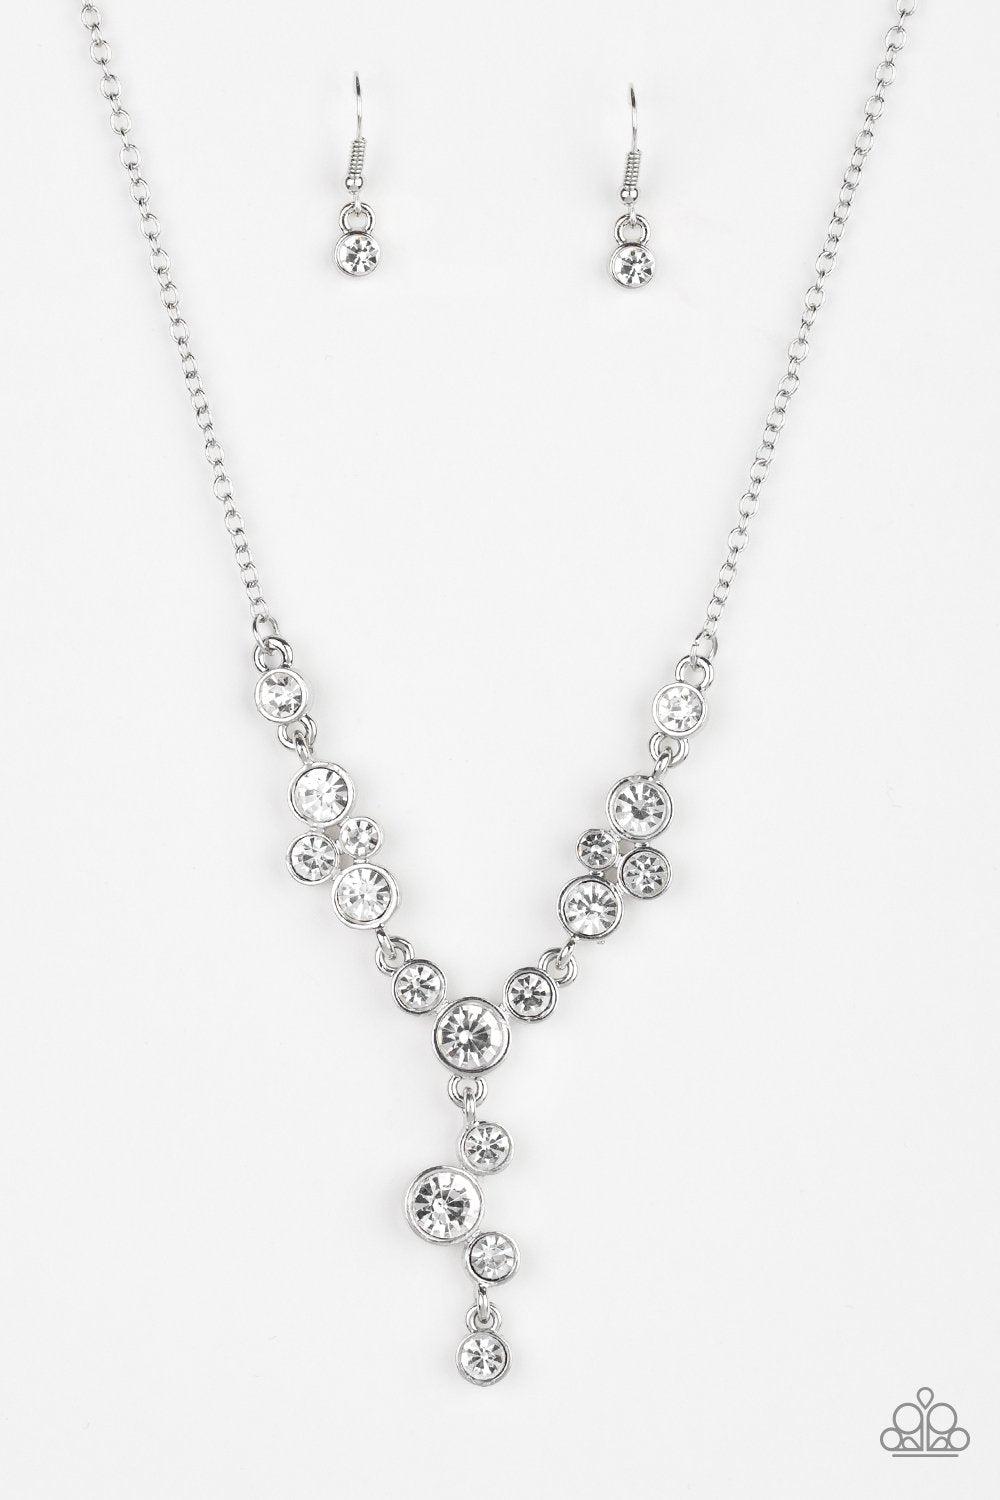 Five Star Starlet White Rhinestone Necklace and matching Earrings - Paparazzi Accessories-CarasShop.com - $5 Jewelry by Cara Jewels